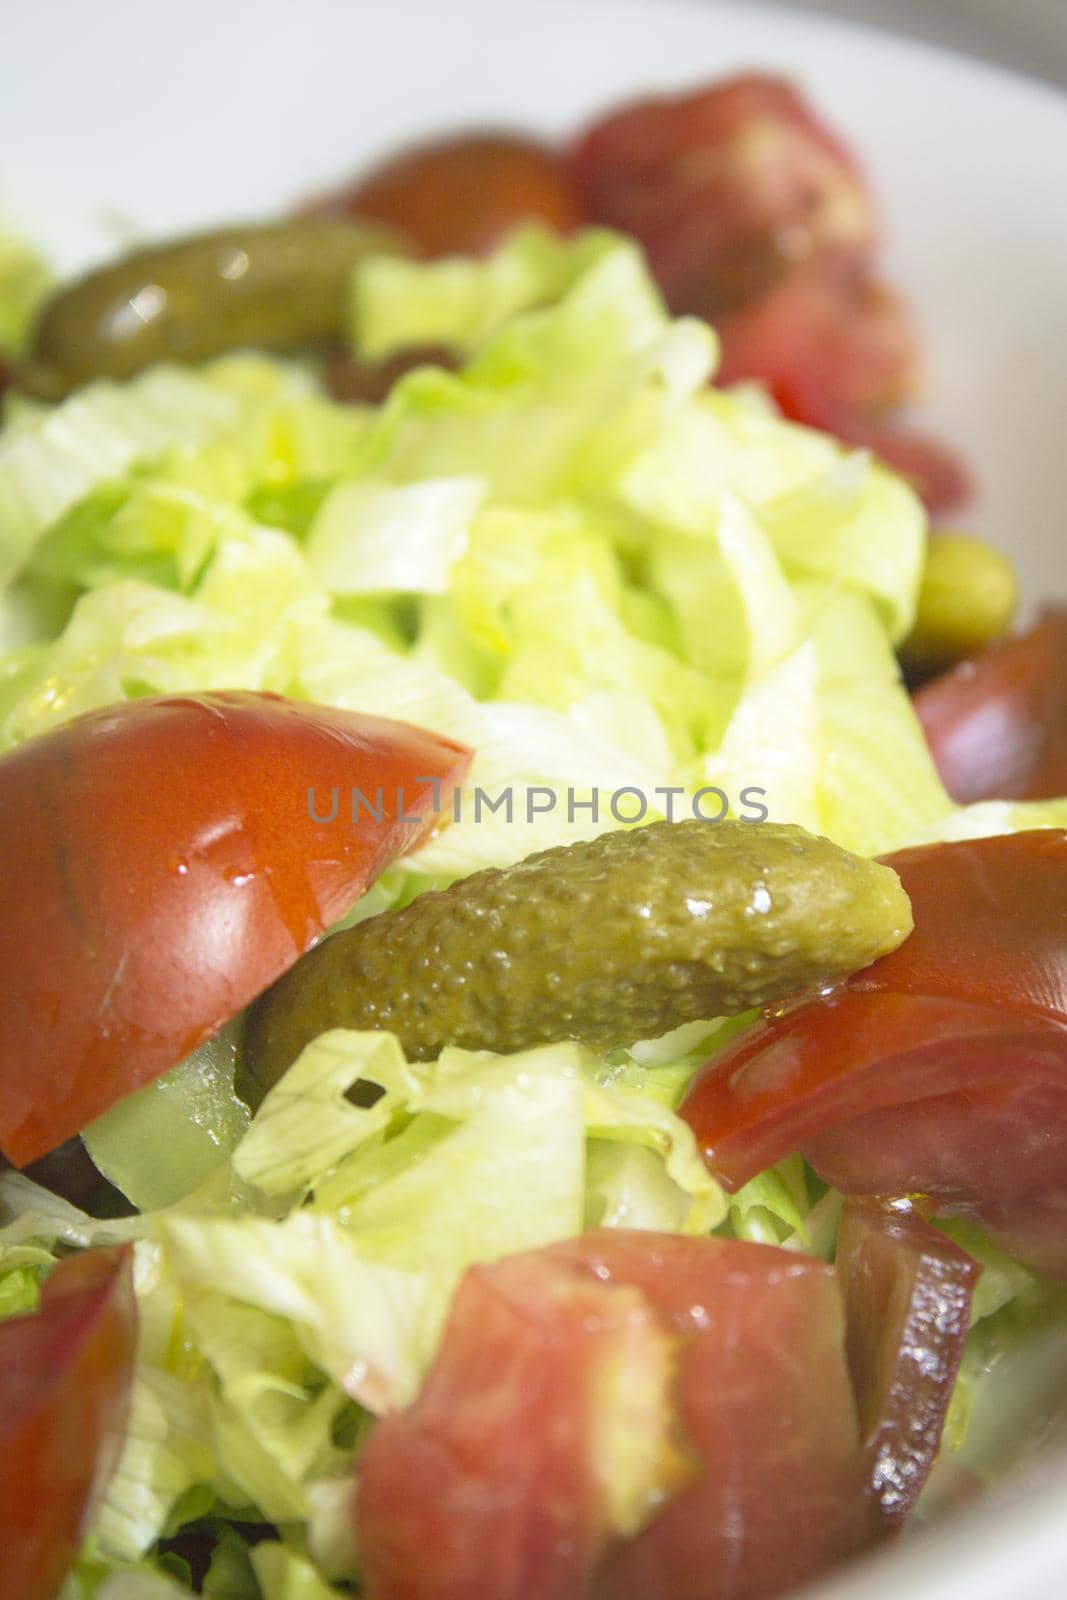 Lettuce salad with tomato and pickles. Raw food